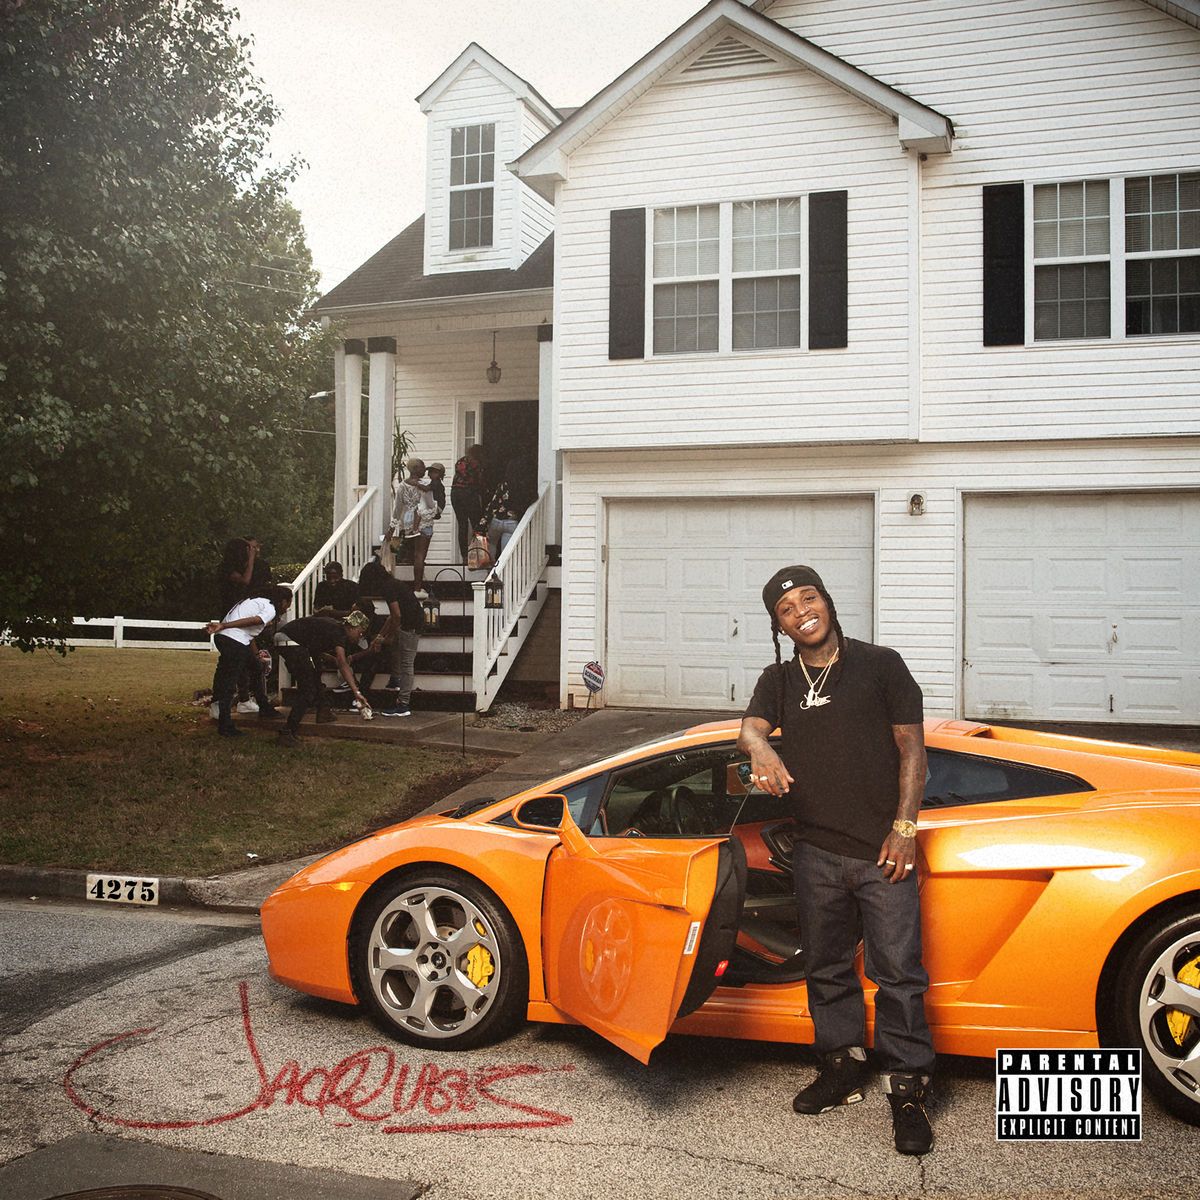 Jacquees 4275